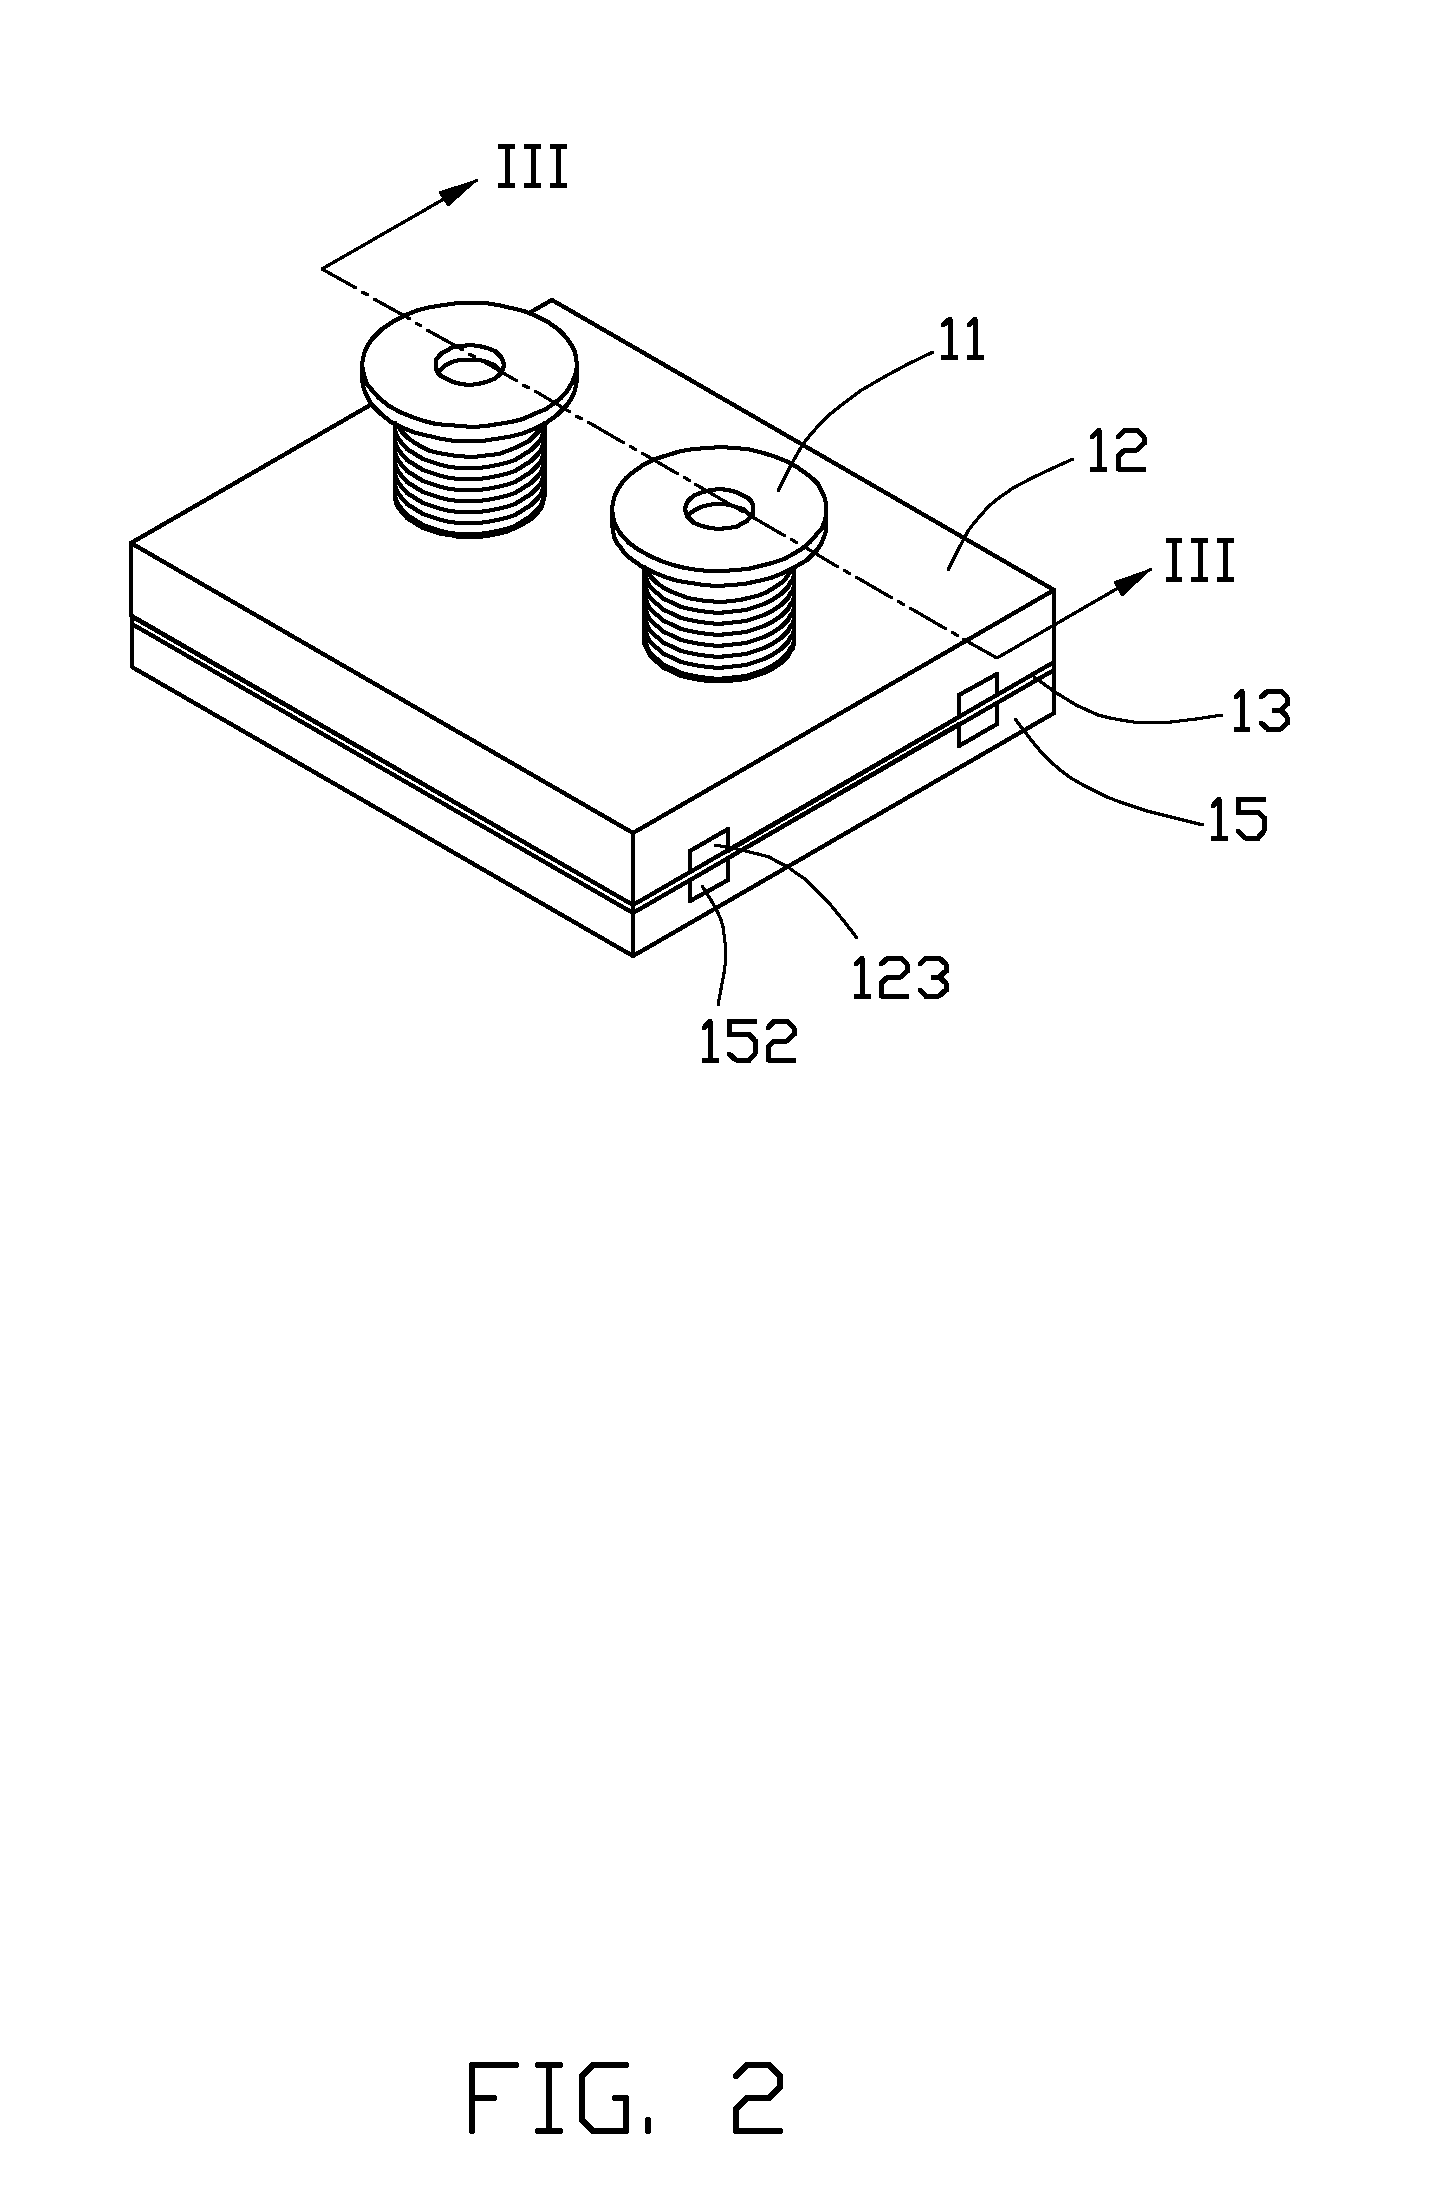 Camera module array for obtaining compound images